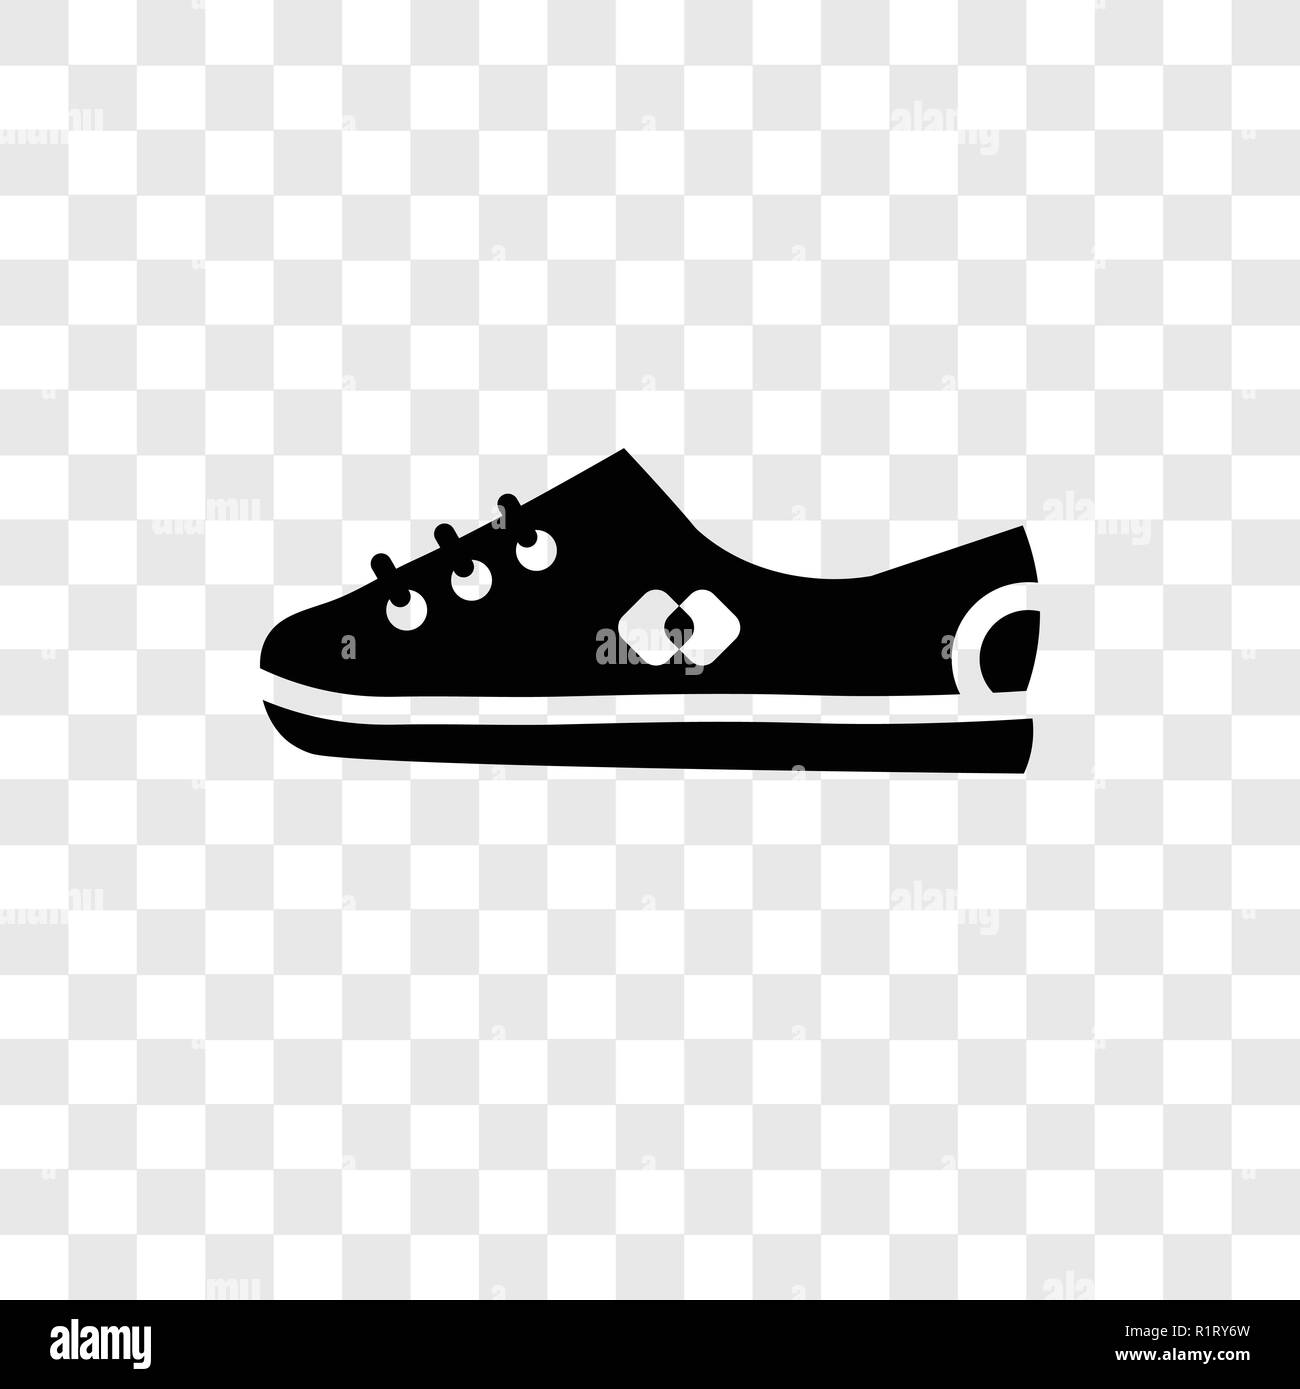 40+ Free Shoes Icon & Shoes Images - Pixabay